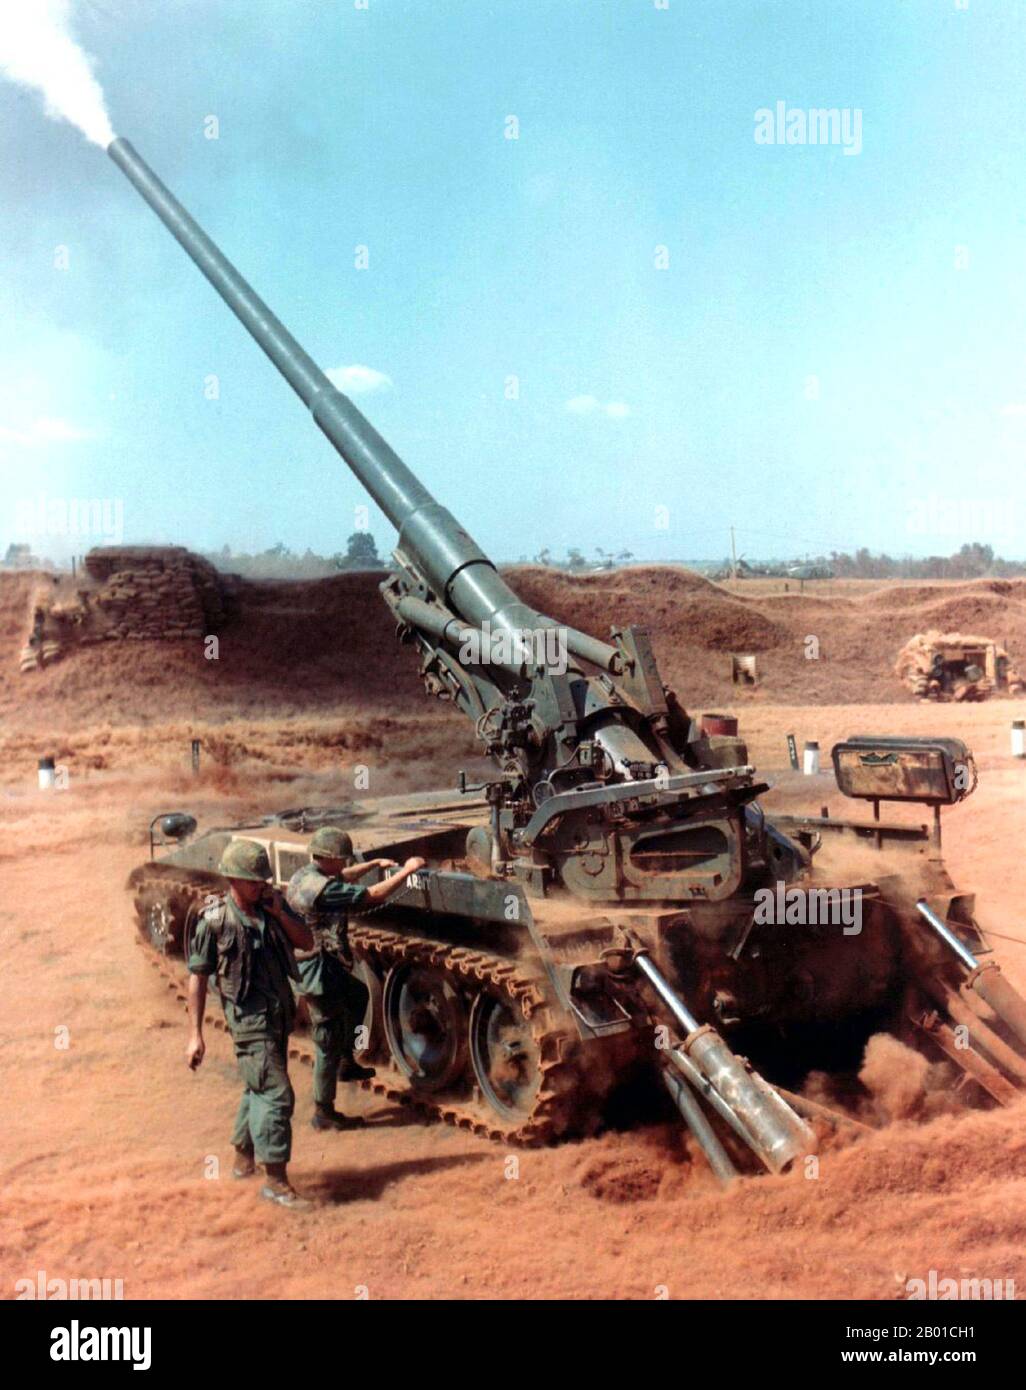 Vietnam: US Army gunners firing an M-107 175mm self-propelled gun during a 'Search and Destroy' operation (Operation San Angelo) in Quang Duc Province, January 1968.  The Second Indochina War, known in America as the Vietnam War, was a Cold War era military conflict that occurred in Vietnam, Laos, and Cambodia from 1 November 1955 to the fall of Saigon on 30 April 1975. This war followed the First Indochina War and was fought between North Vietnam, supported by its communist allies, and the government of South Vietnam, supported by the U.S. and other anti-communist nations. Stock Photo